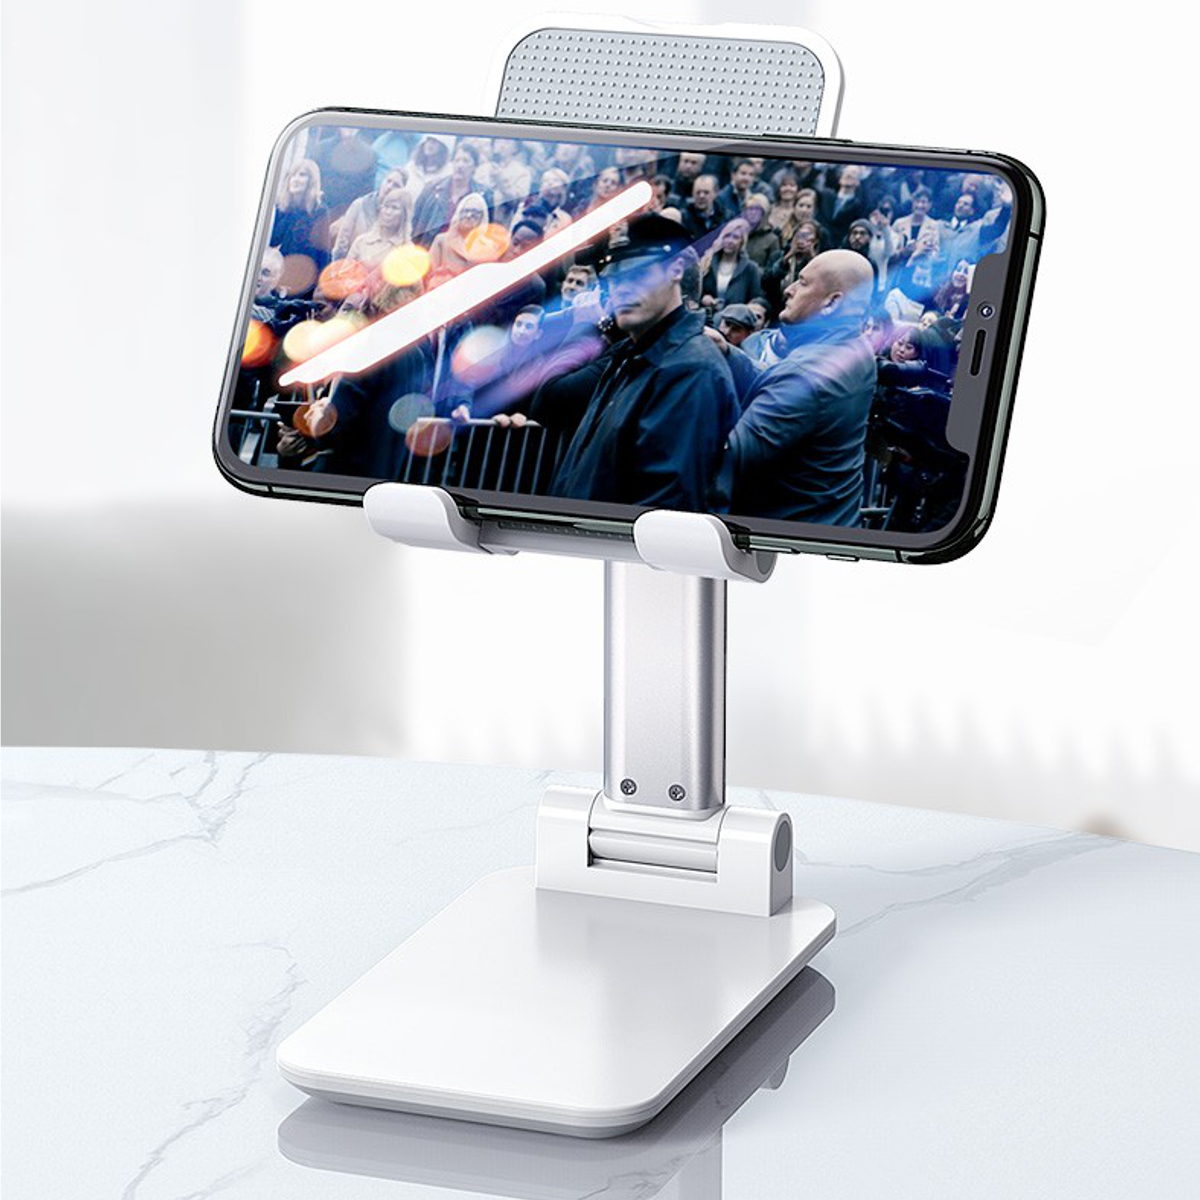 CCT9-Universal-Folding-Telescopic-Desktop-Mobile-Phone-Tablet-Holder-Stand-for-iPad-Air-for-iPhone-1-1820698-6